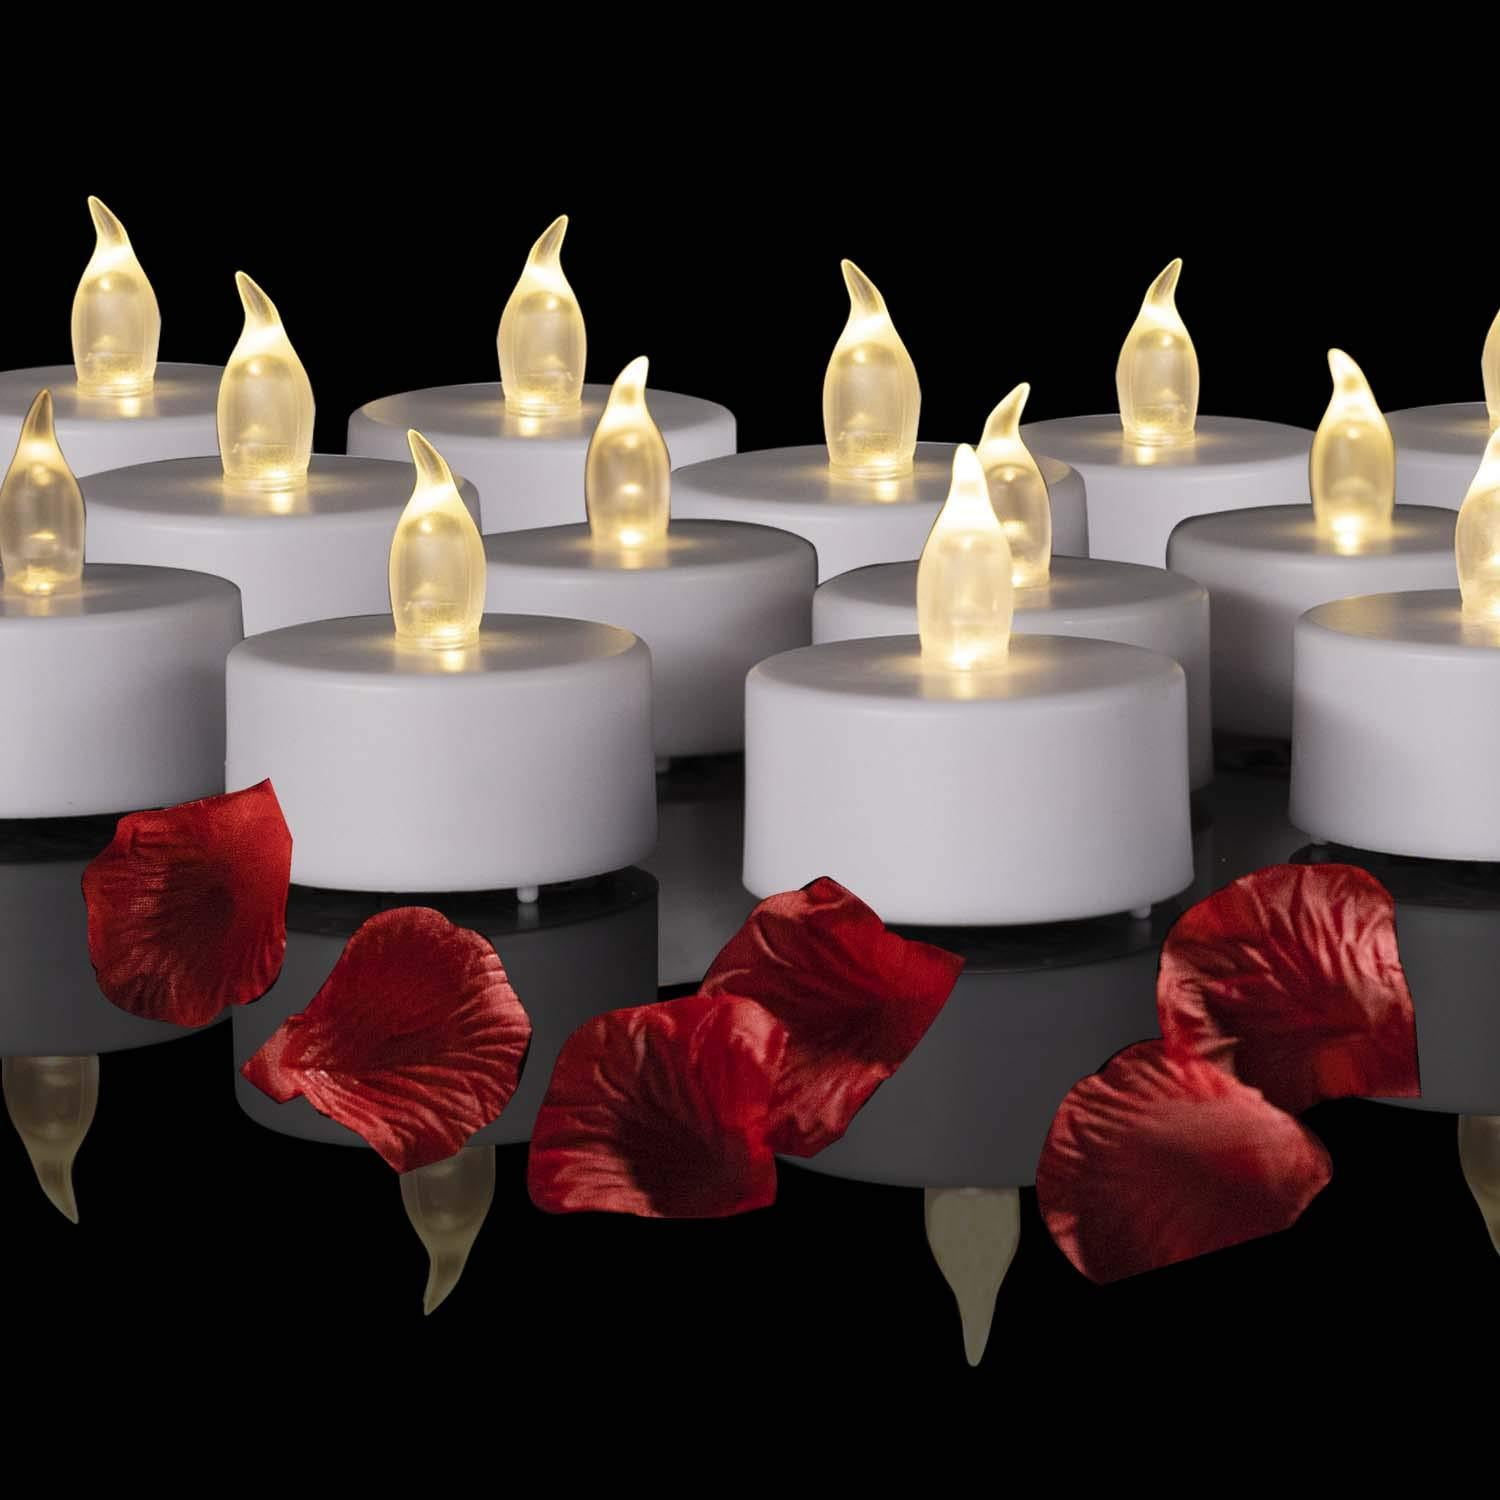 6/12/24pcs Flameless Votive Candles Battery Operated Flickering LED Tea Light US 